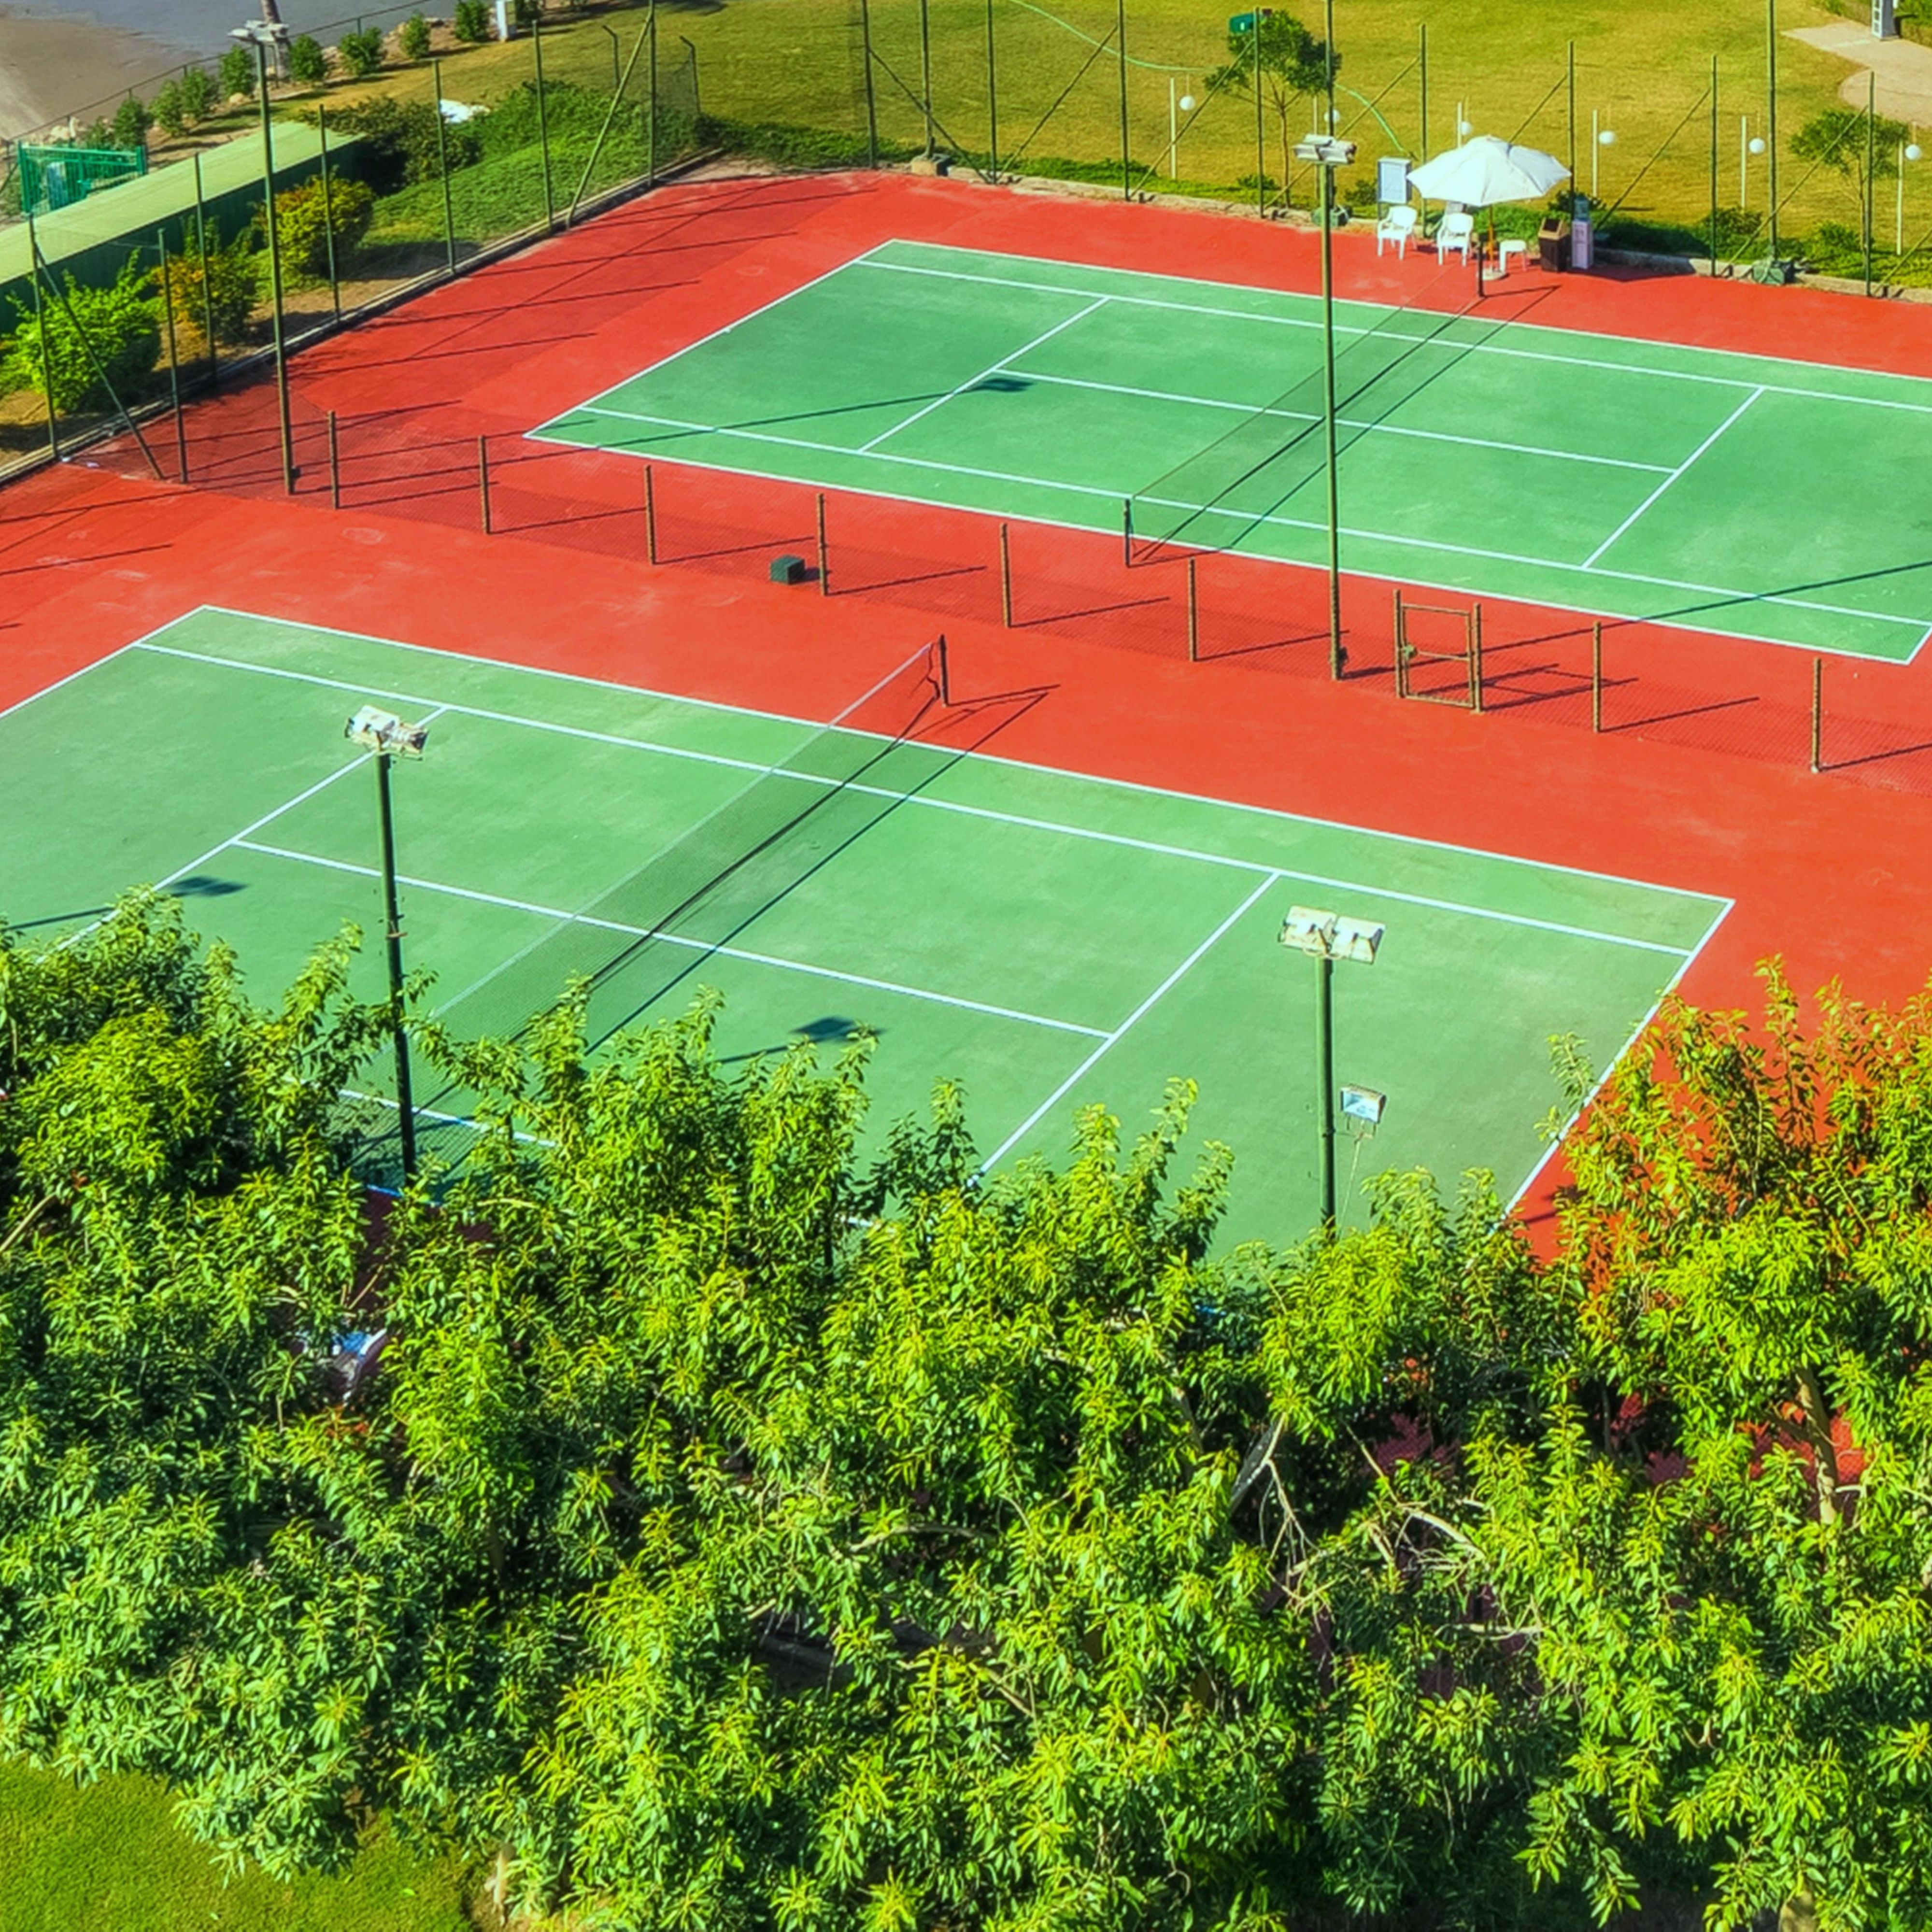 Tennis courts to keep you active during your stay